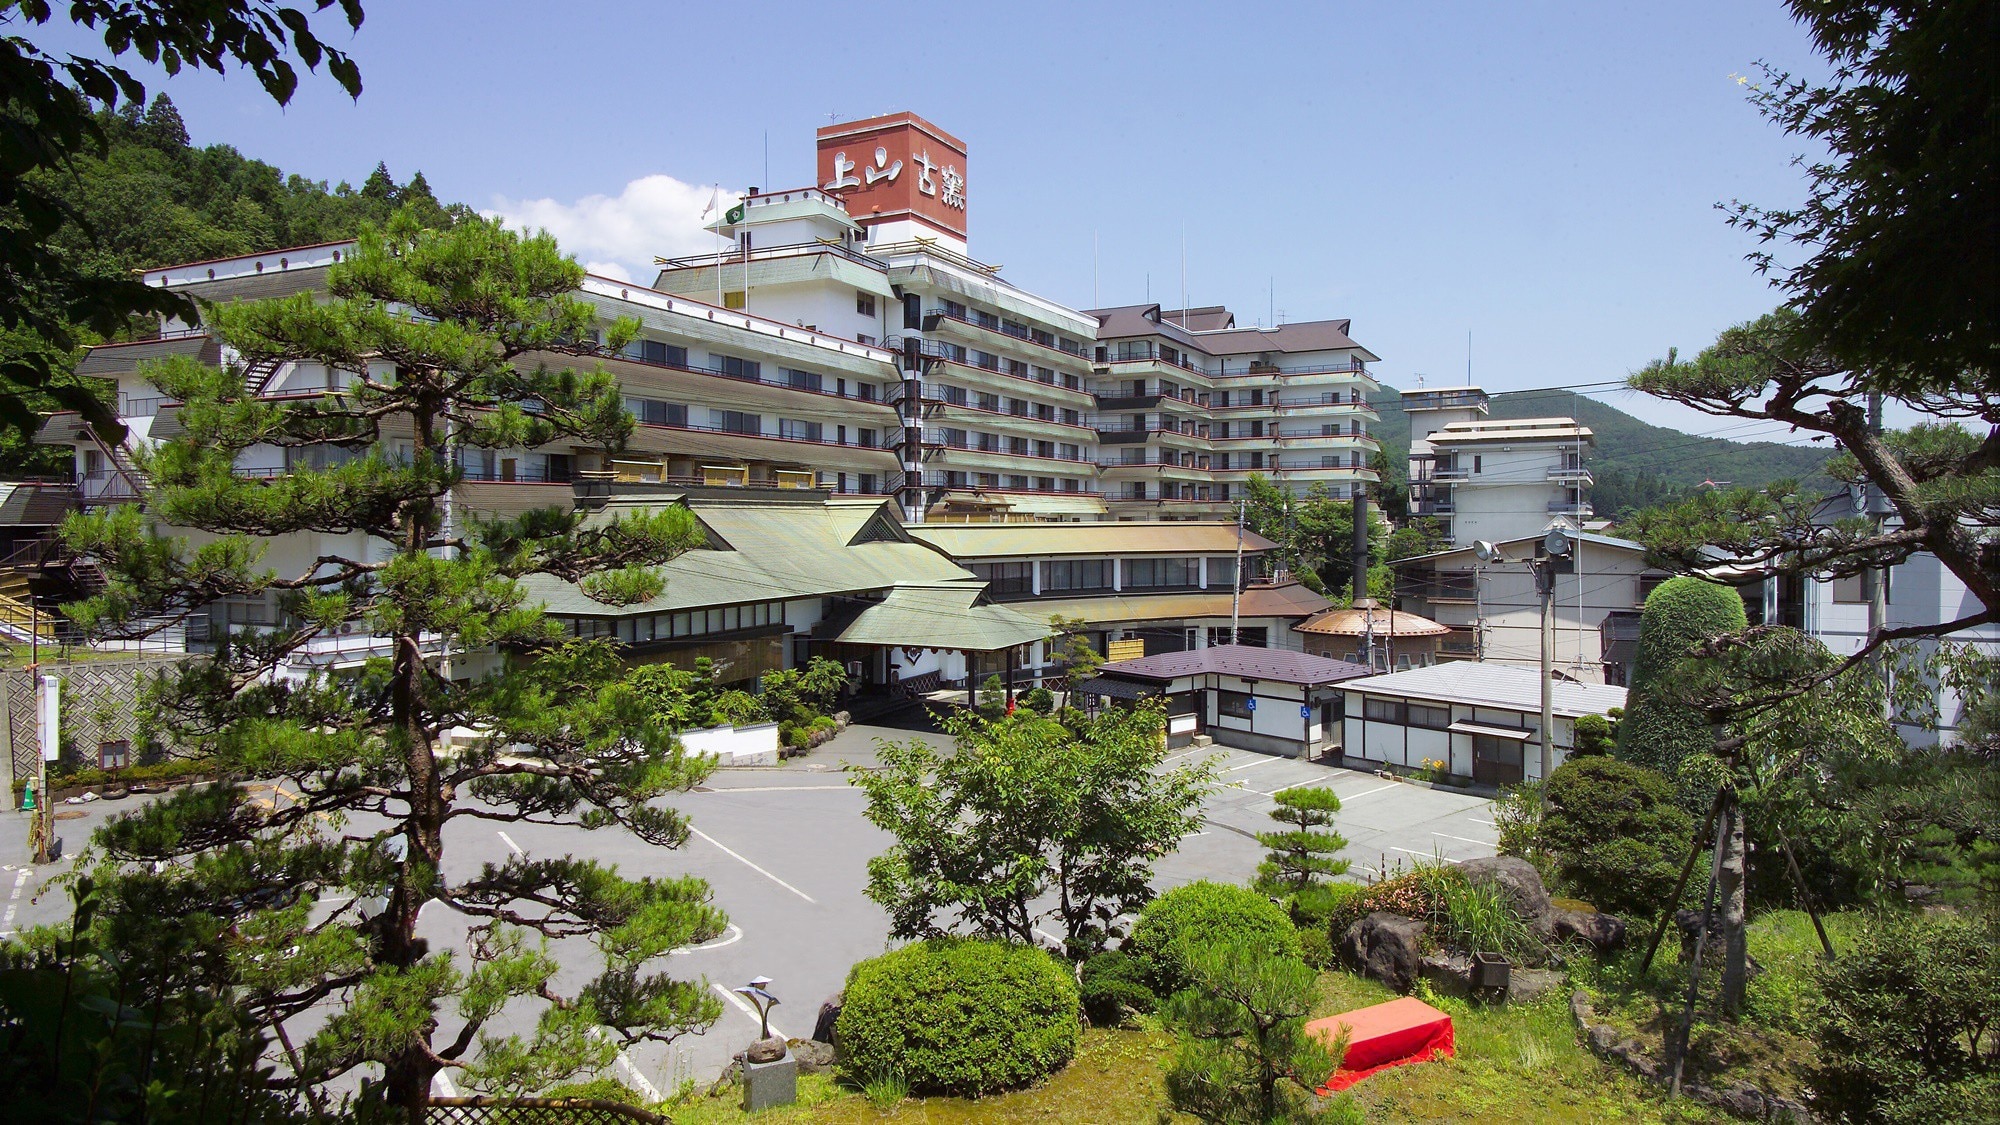 [Exterior] The Kaminoyama district of Yamagata Prefecture is a hot spring village with a history of more than 555 years. The hotel was founded in 1951.